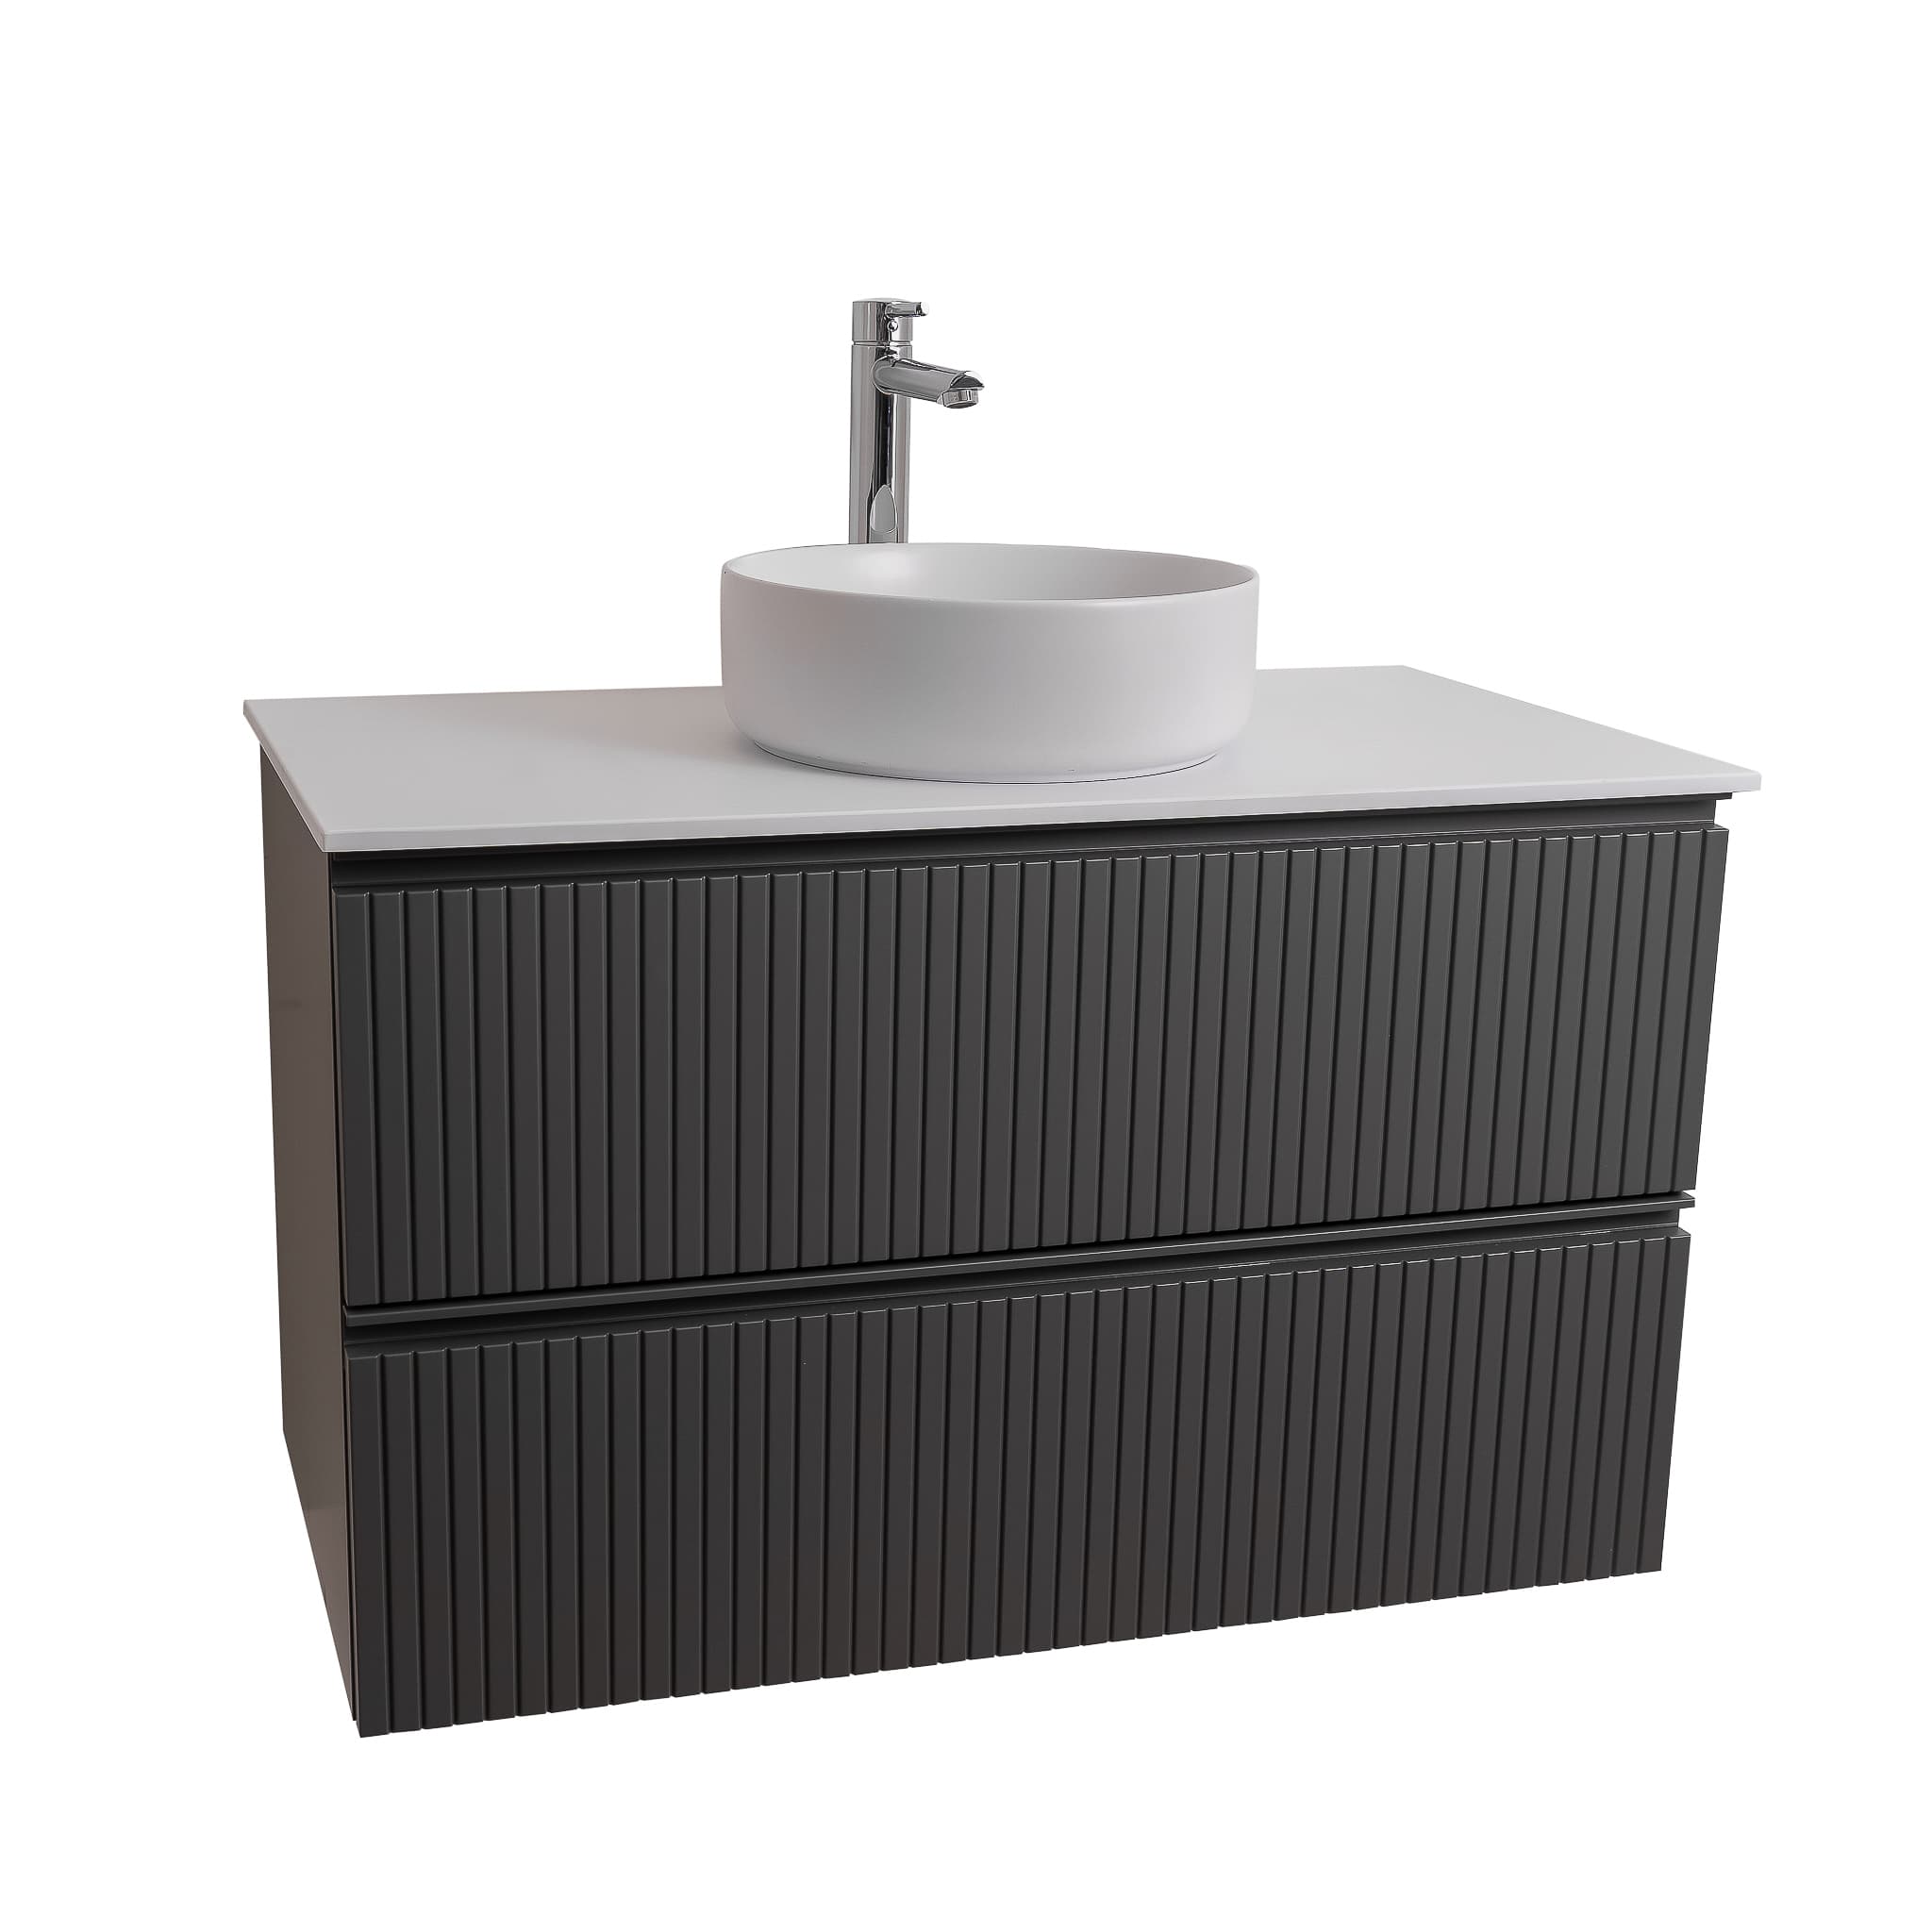 Ares 39.5 Matte Grey Cabinet, Ares White Top And Ares White Ceramic Basin, Wall Mounted Modern Vanity Set